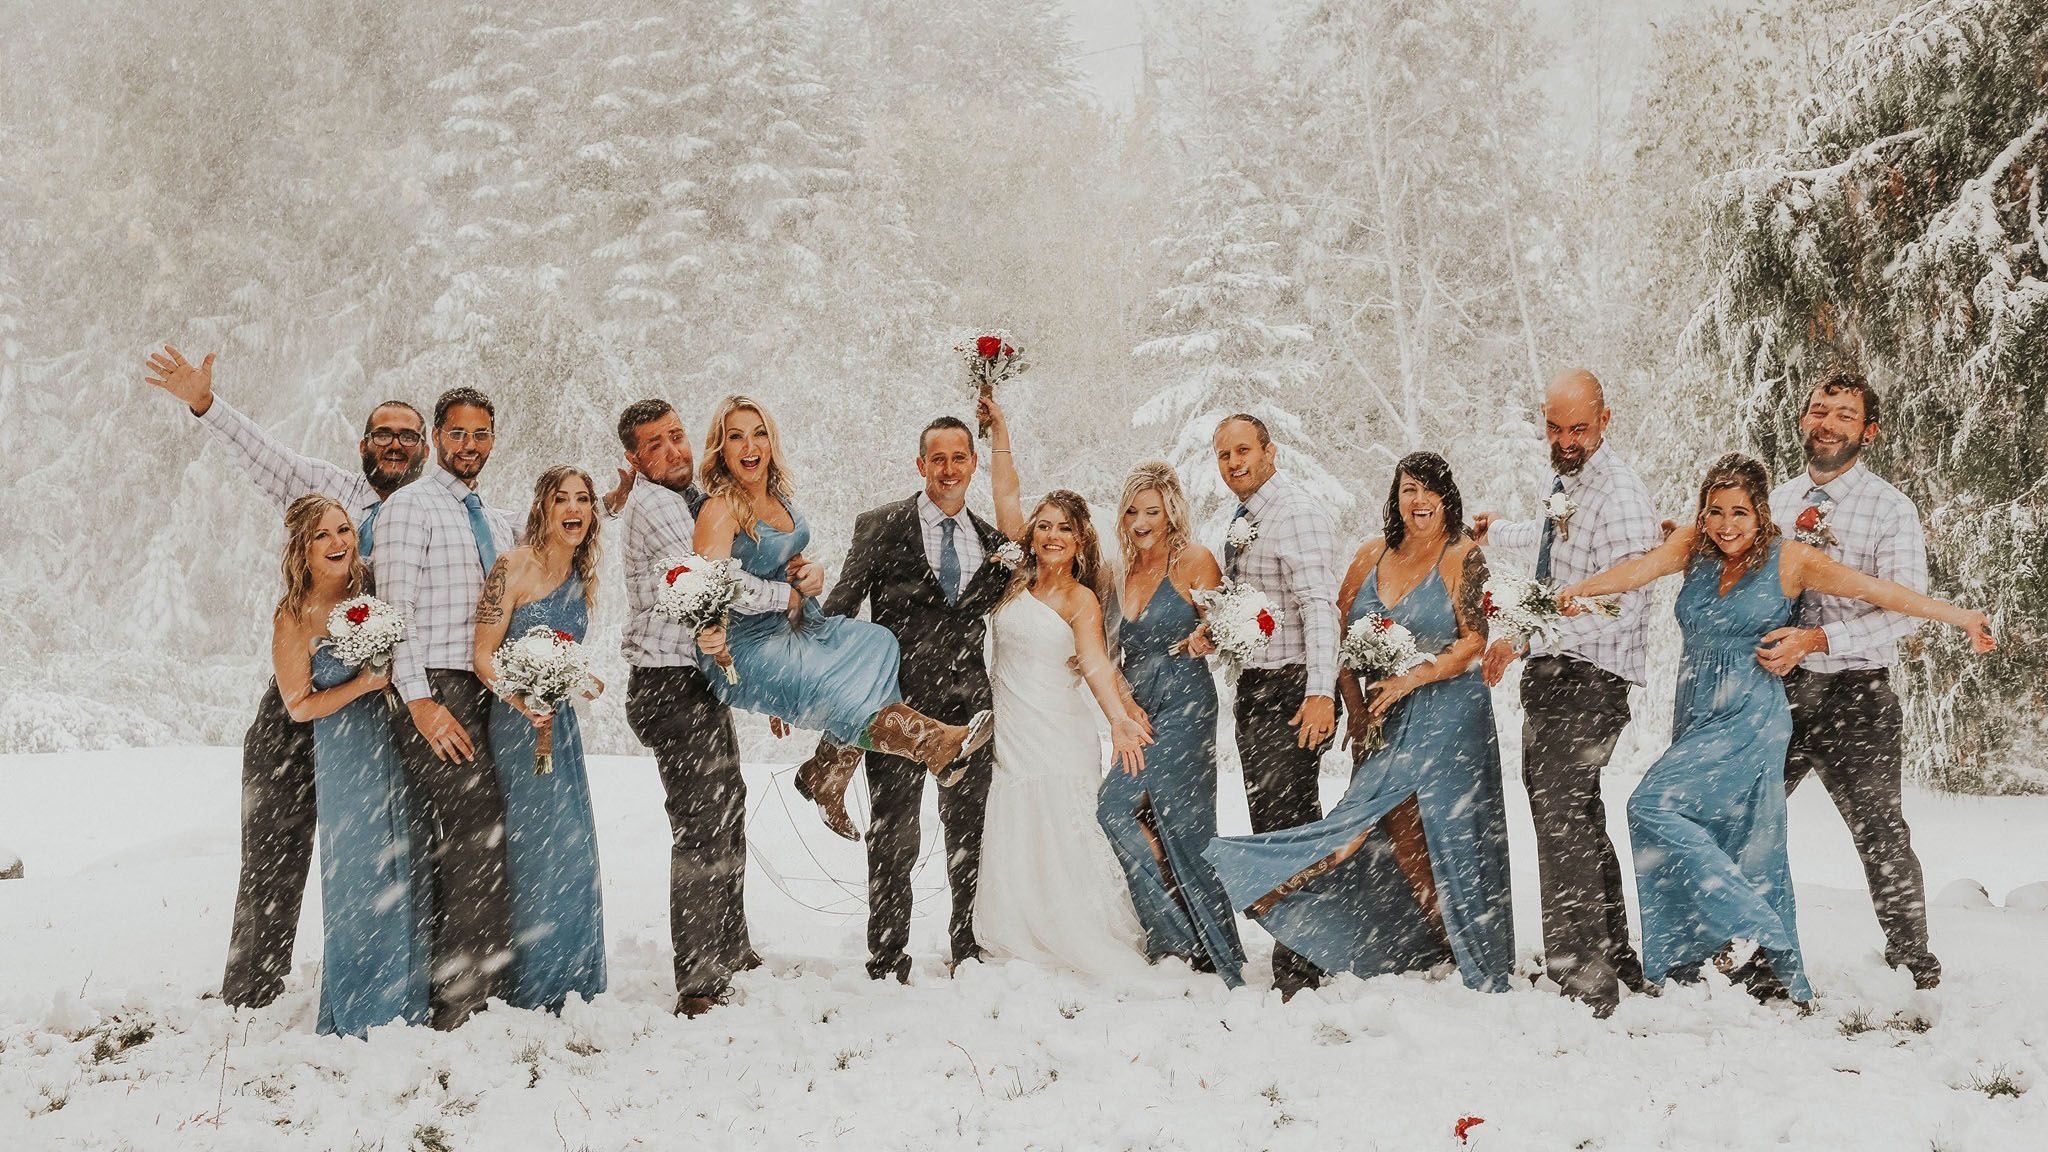 They planned the perfect fall wedding in Spokane - then a snowstorm hit